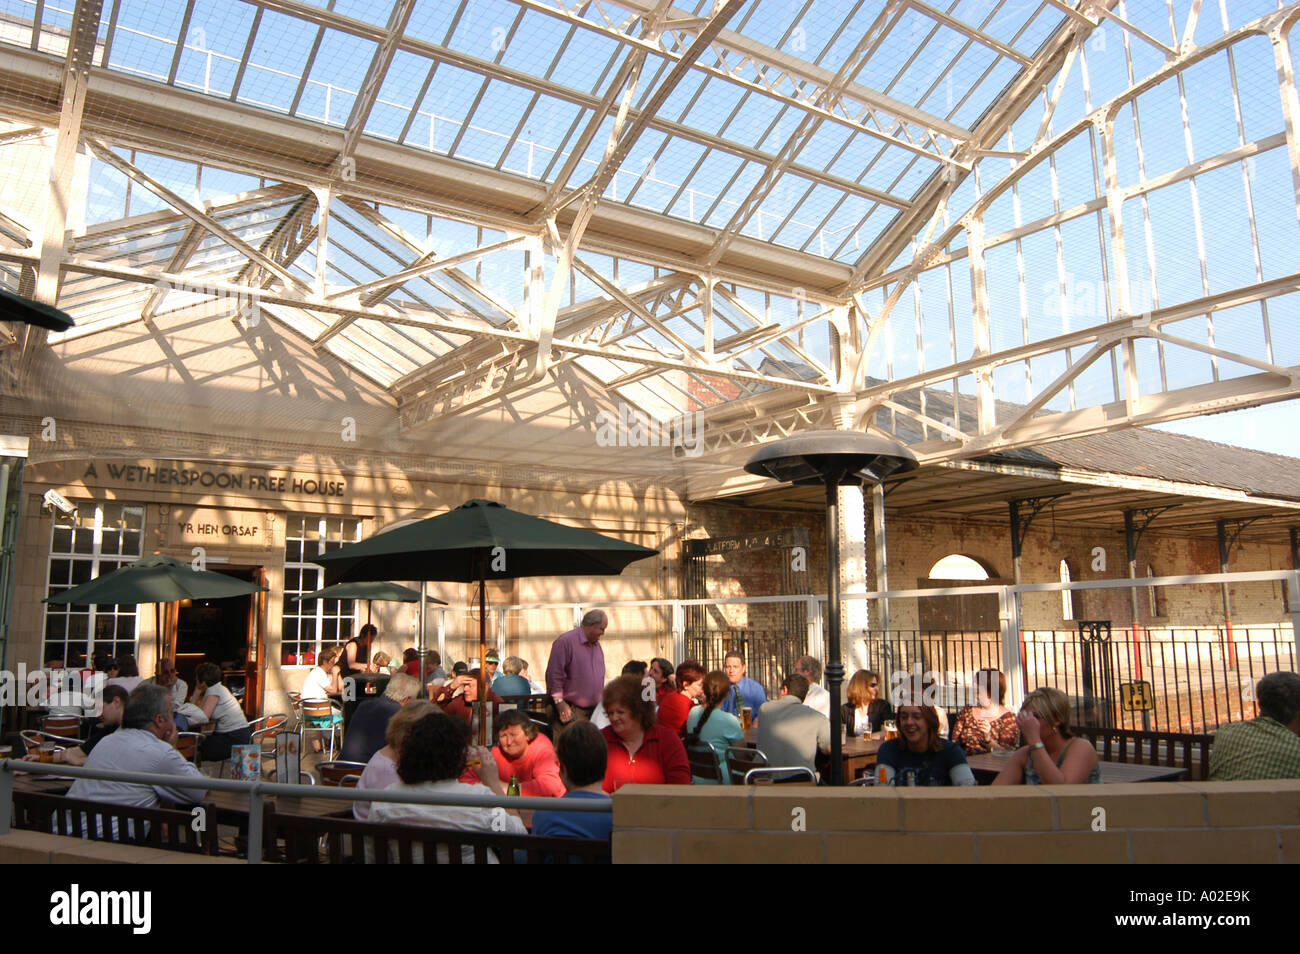 people sitting in the covered area of Wetherspoons chain pub in the converted Aberystwyth railway station building Stock Photo